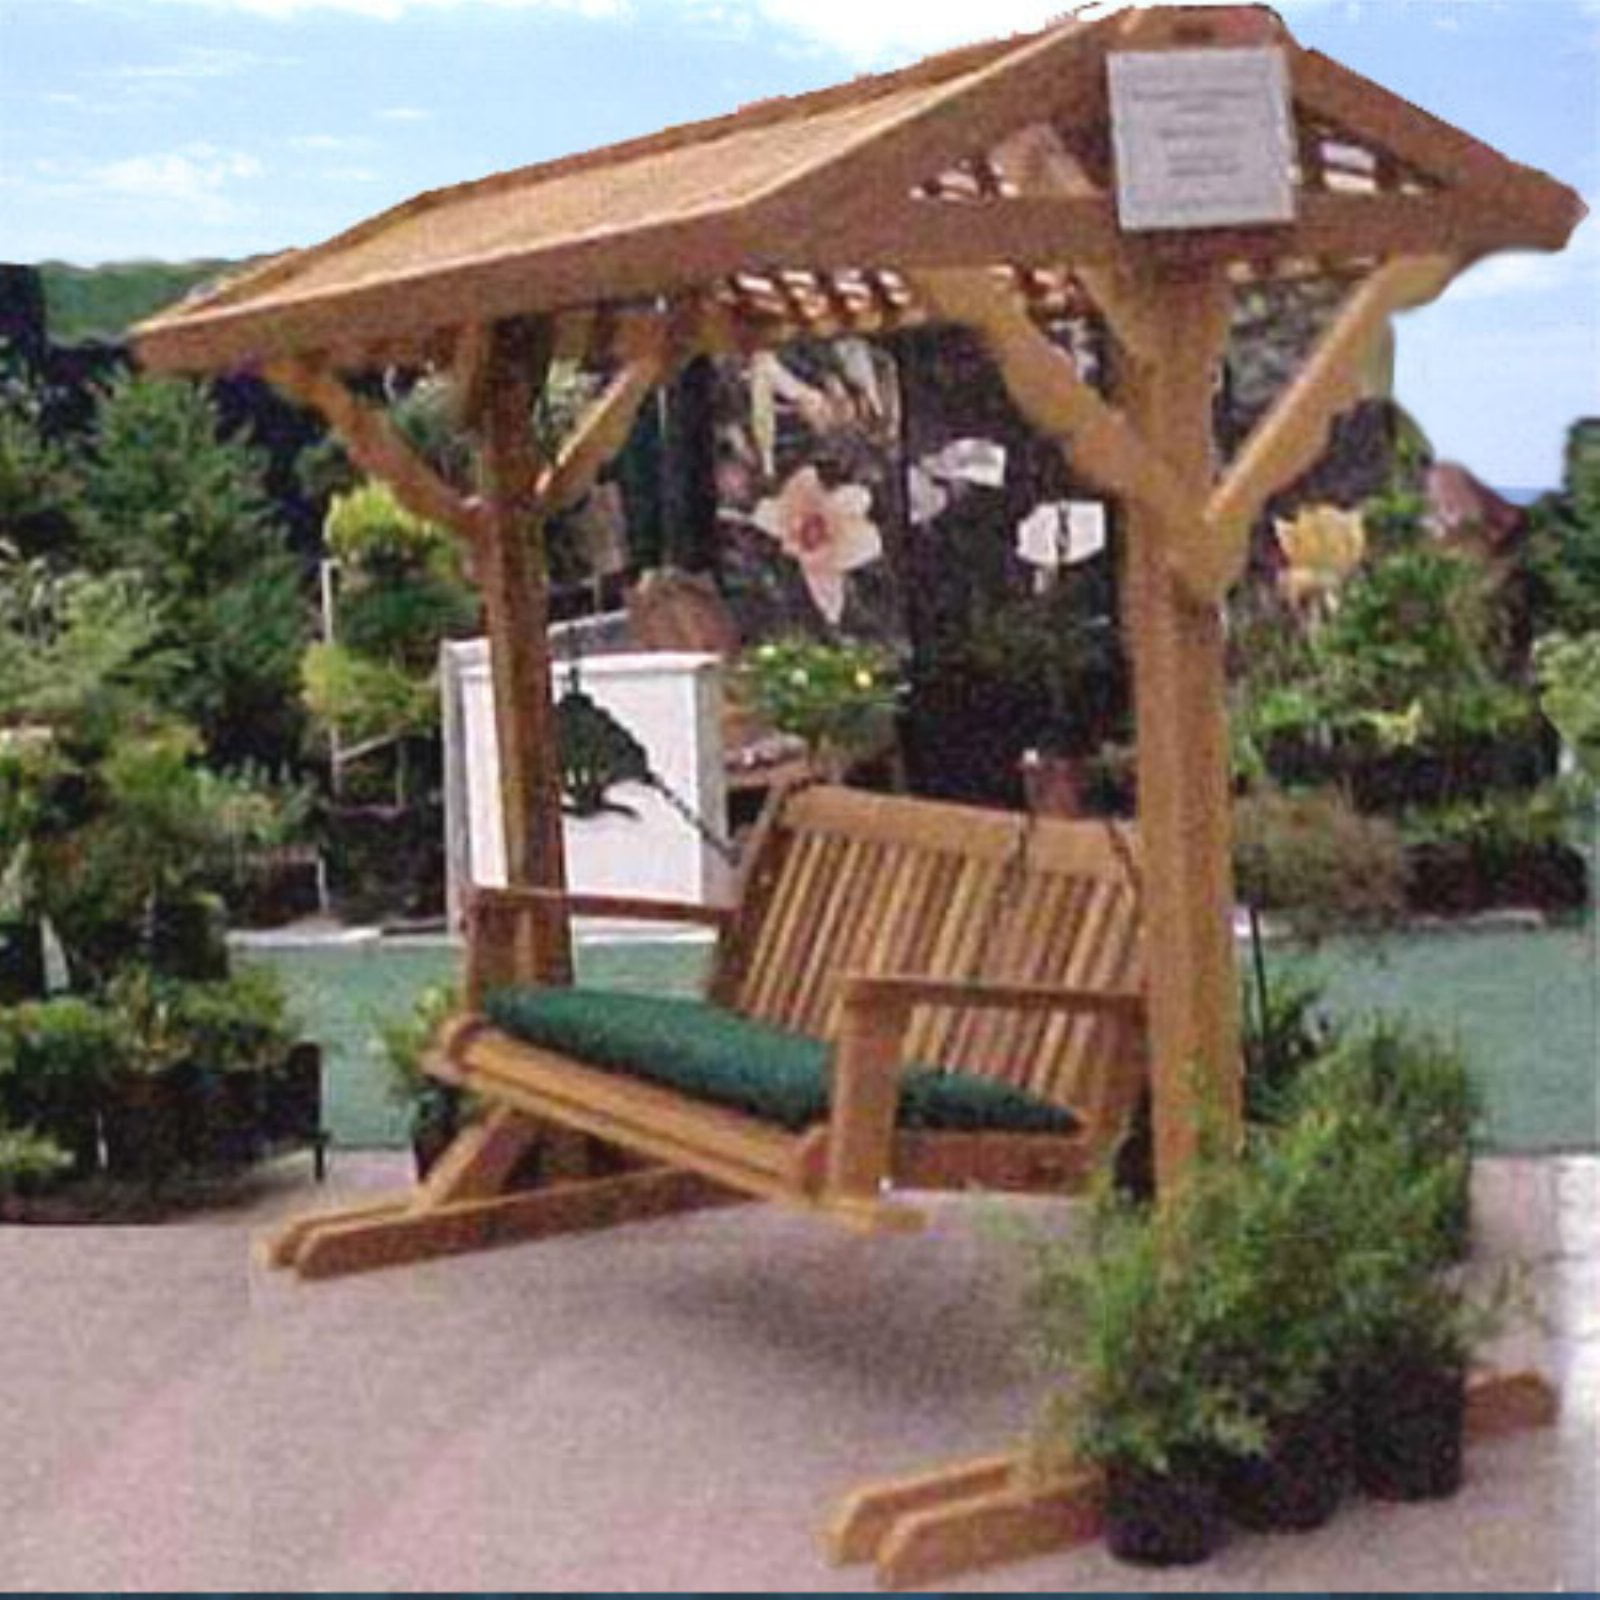 Wood Country Yardswing Stand With Roof, Wooden Lawn Swings With Canopy